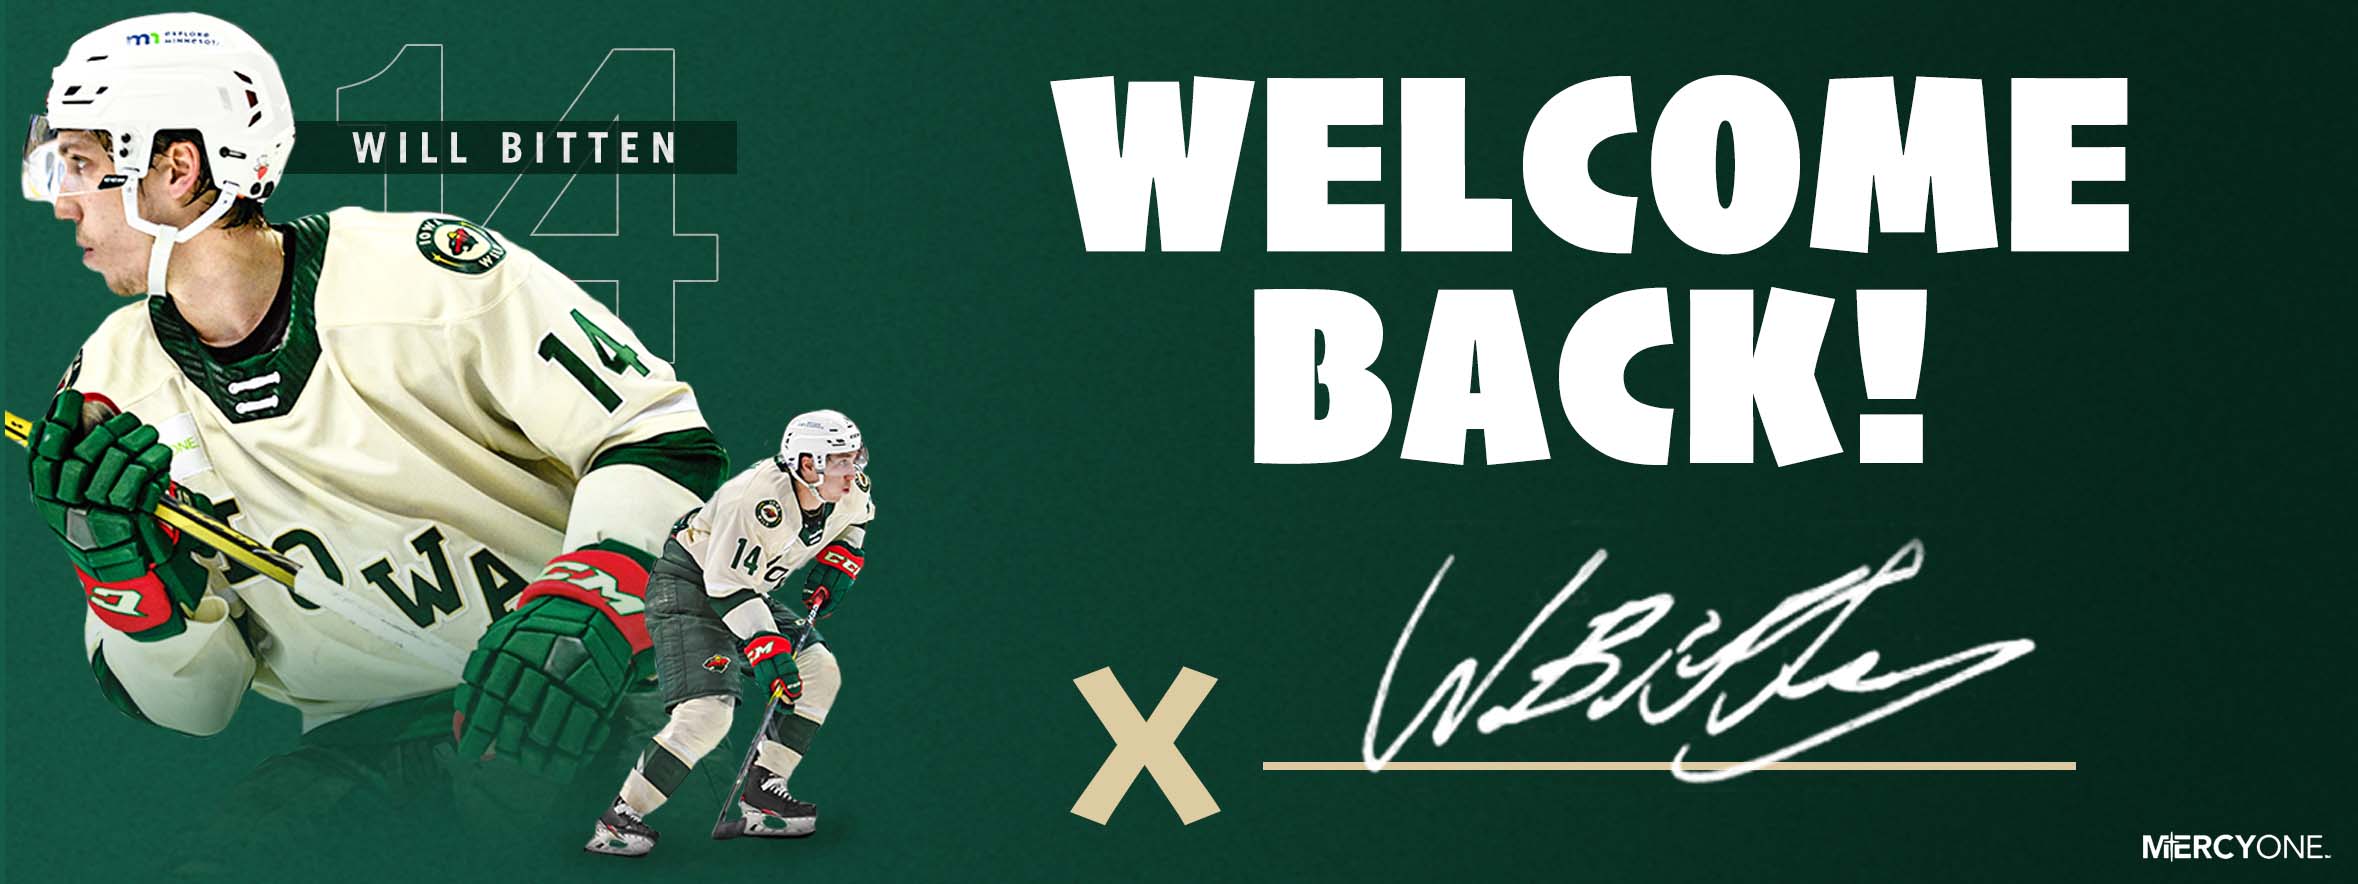 MINNESOTA WILD SIGNS FORWARD WILL BITTEN TO A ONE-YEAR, TWO-WAY CONTRACT